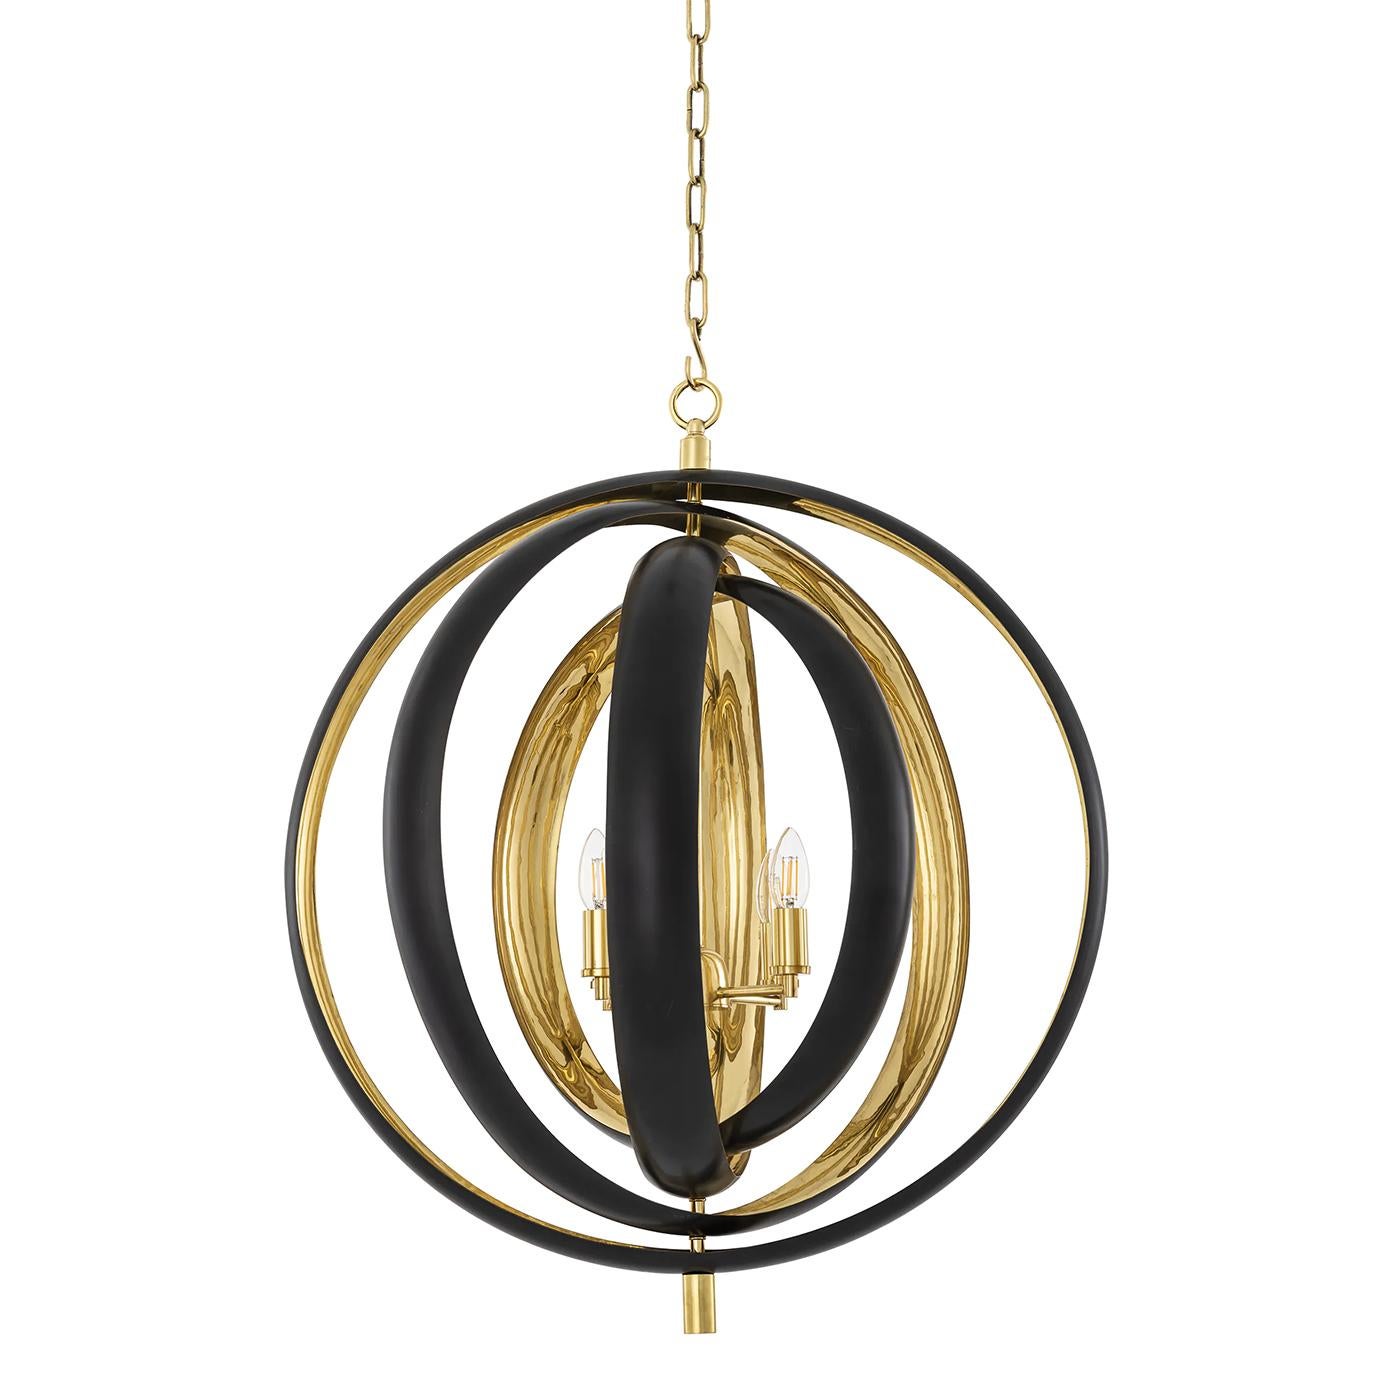 Chandelier Shanon with all structure in solid brass,
inside in polished finish, outside in gunmetal finish.
4 bulbs, lamp holder type E14, max 40 watts, 220-
240 volt. Bulbs not included. Dimmable, dimmer not
included. 150cm hanging chain.